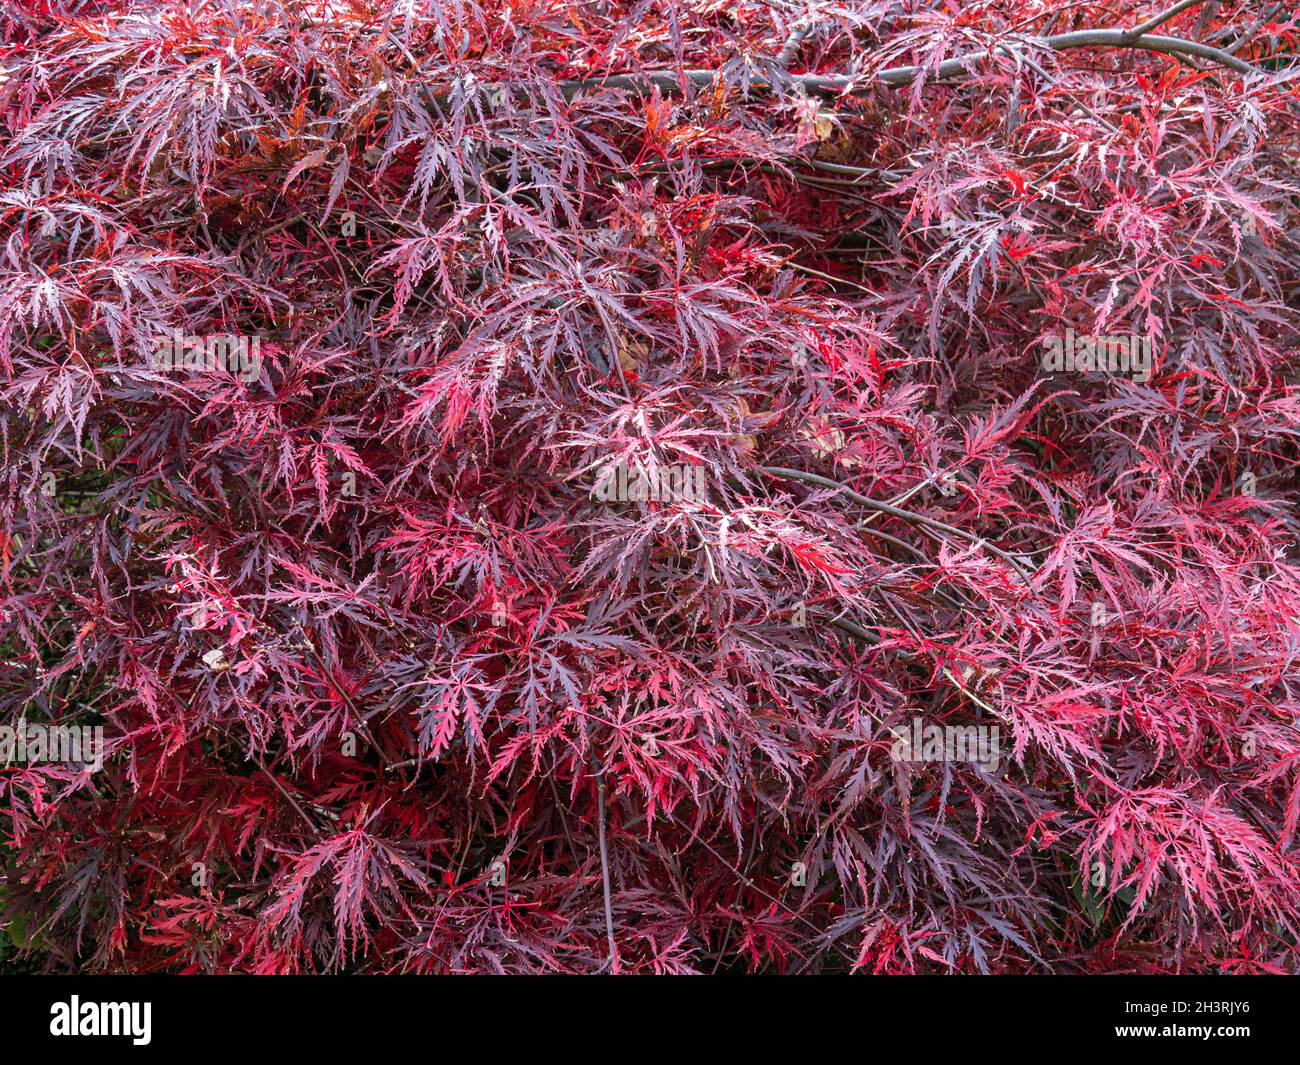 The deep red dissected autumn leaves of Acer palmatum var. dissectum Stock Photo